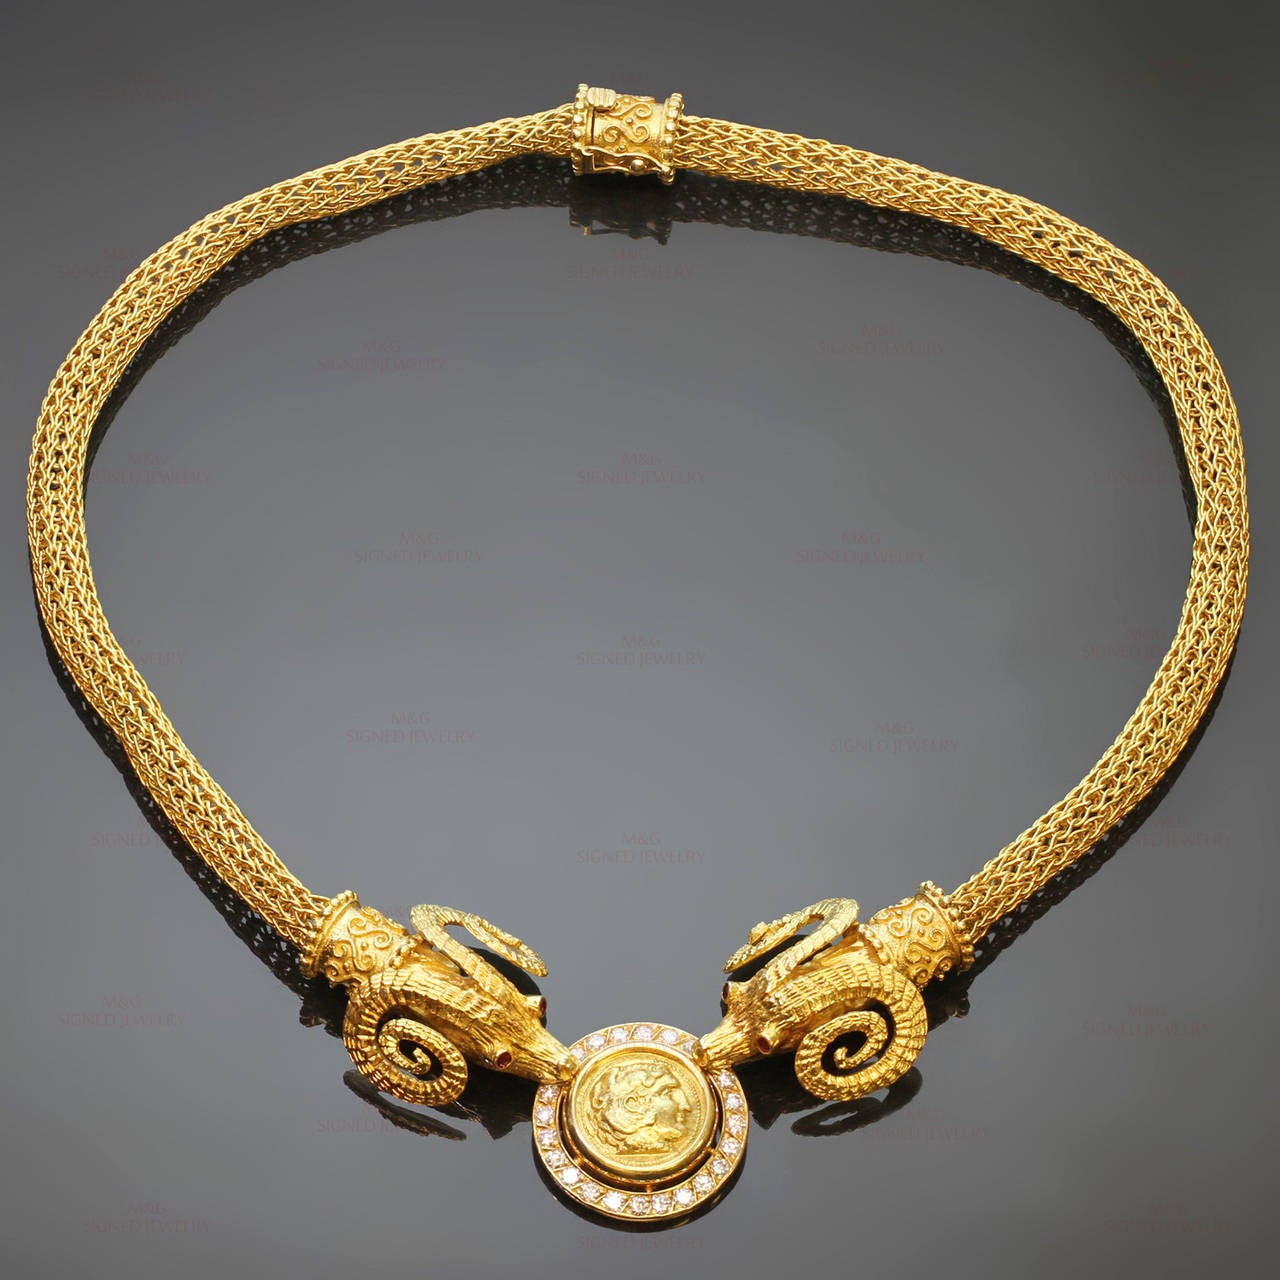 This magnificent and intricately-decorated  necklace is made in 18k yellow gold and features 2 horned ram heads with red ruby eyes of an estimated 0.24 carats and holding a round frame accented with brilliant-cut round E-F VVS2-VS1 diamonds of an